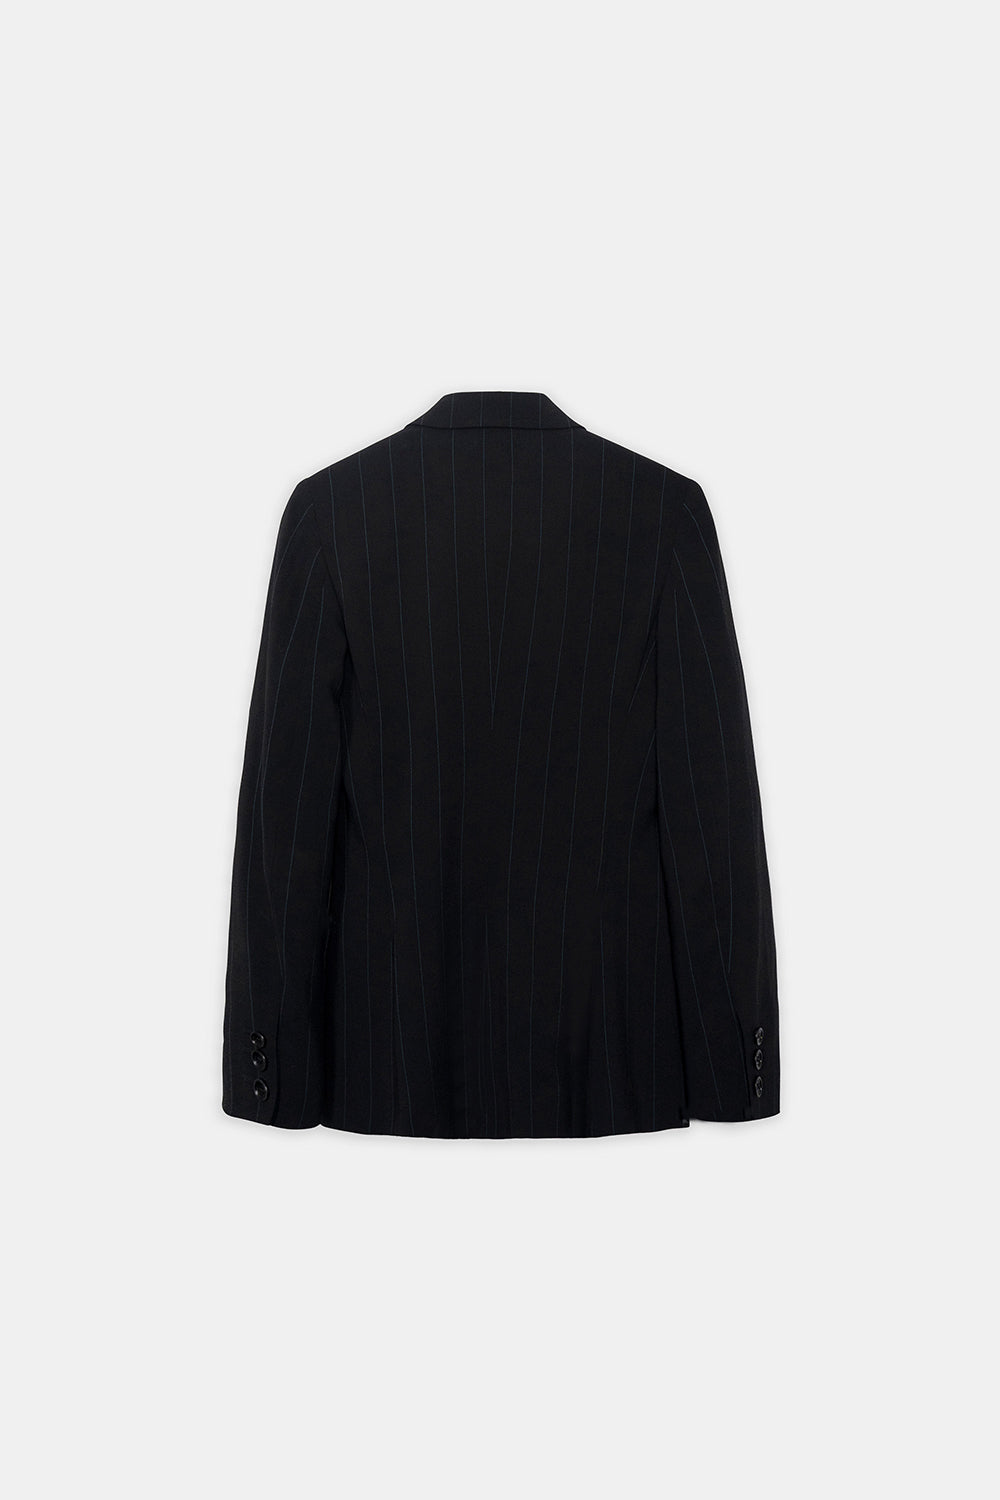 Dolce & Gabbana Pre-Owned Double Breasted Pinstripe Blazer Back